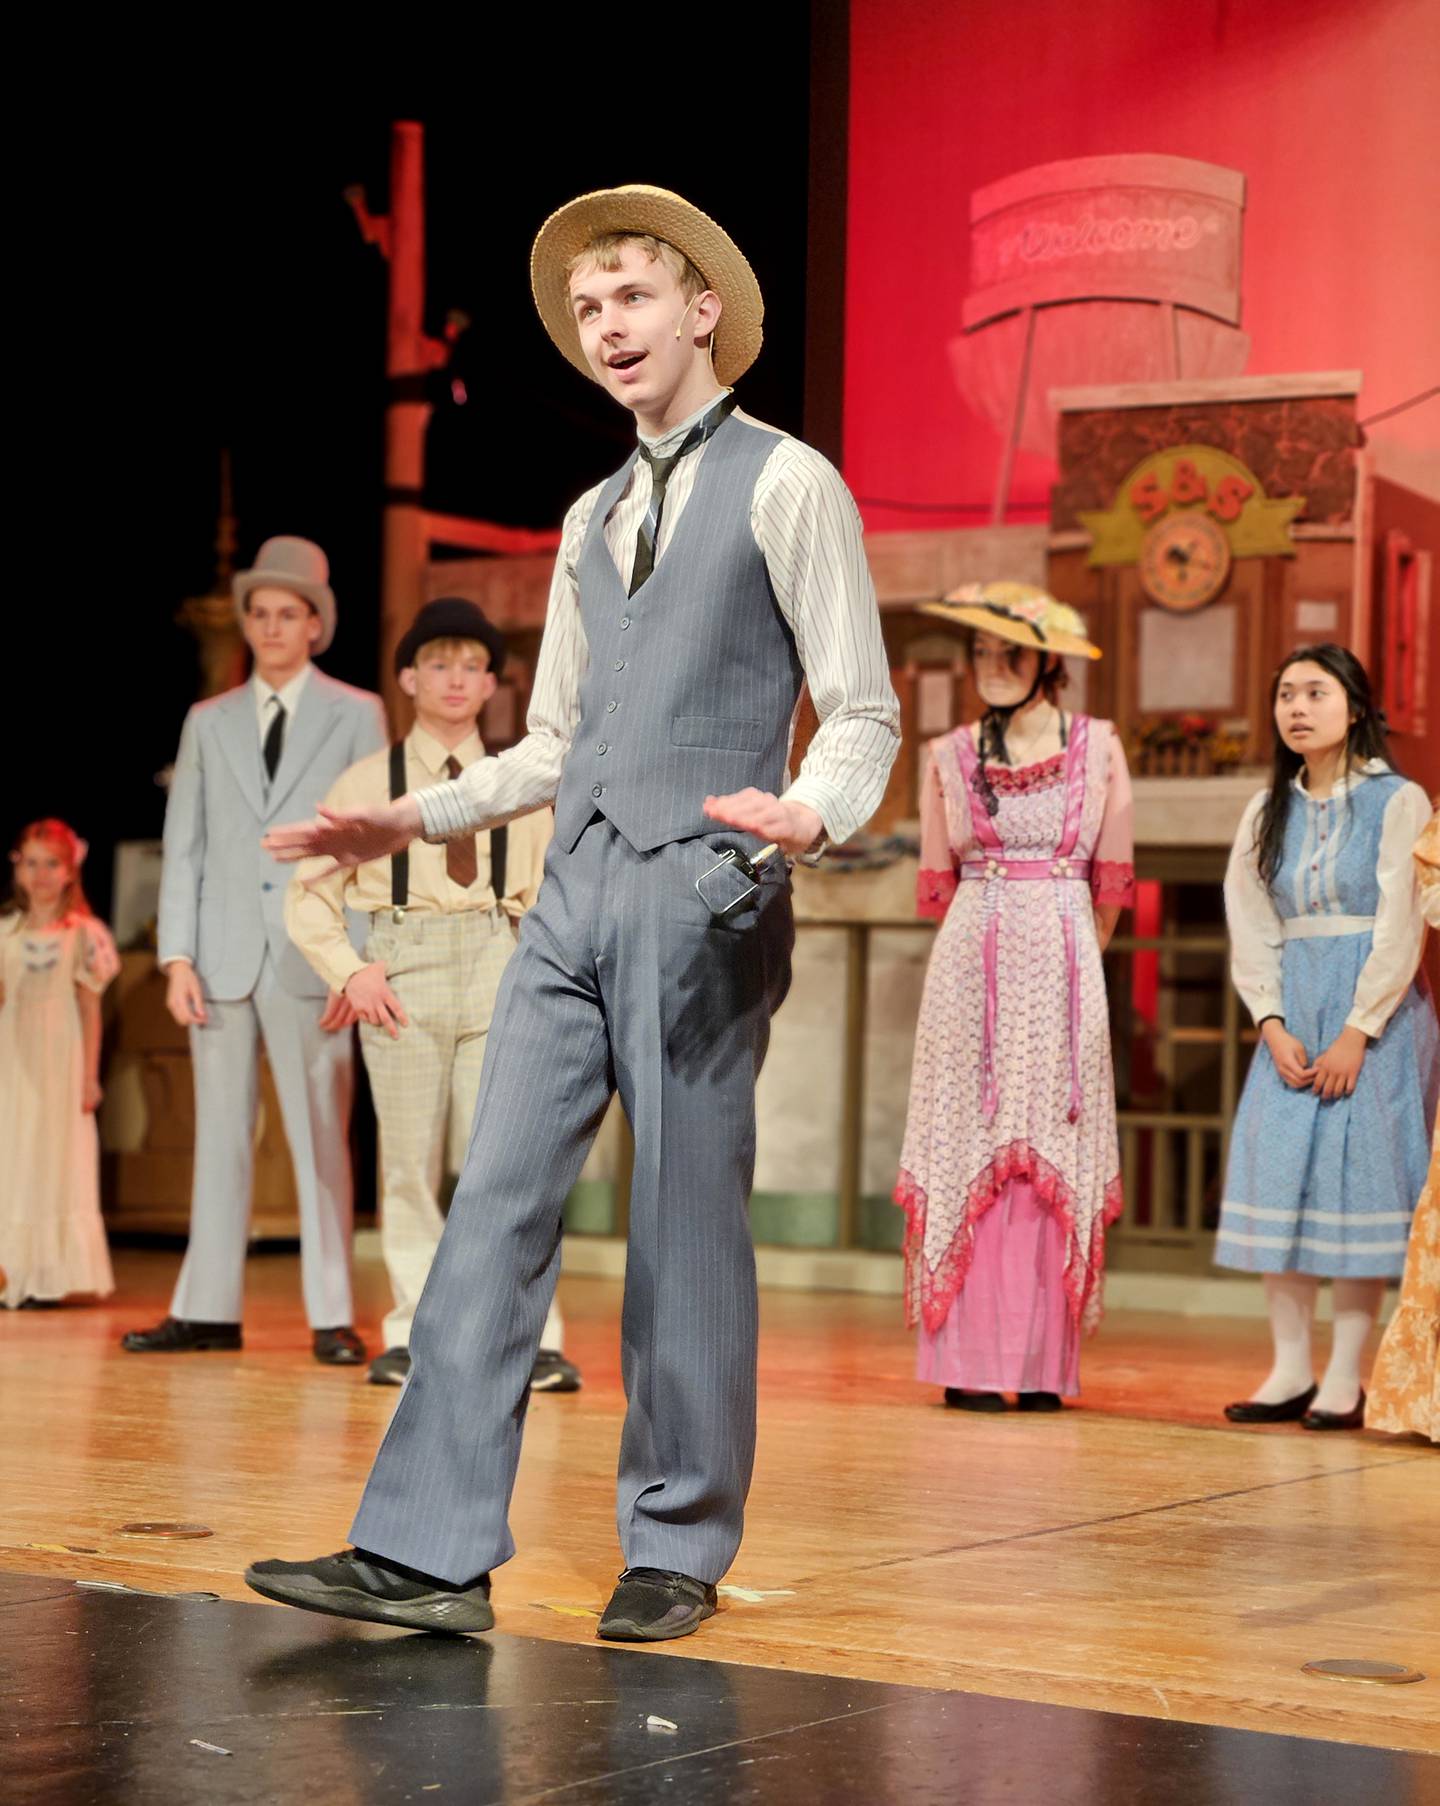 Newton High School students will be performing "The Music Man Jr.” at 7 p.m. on March 28 and 29 in the Center of Performance.